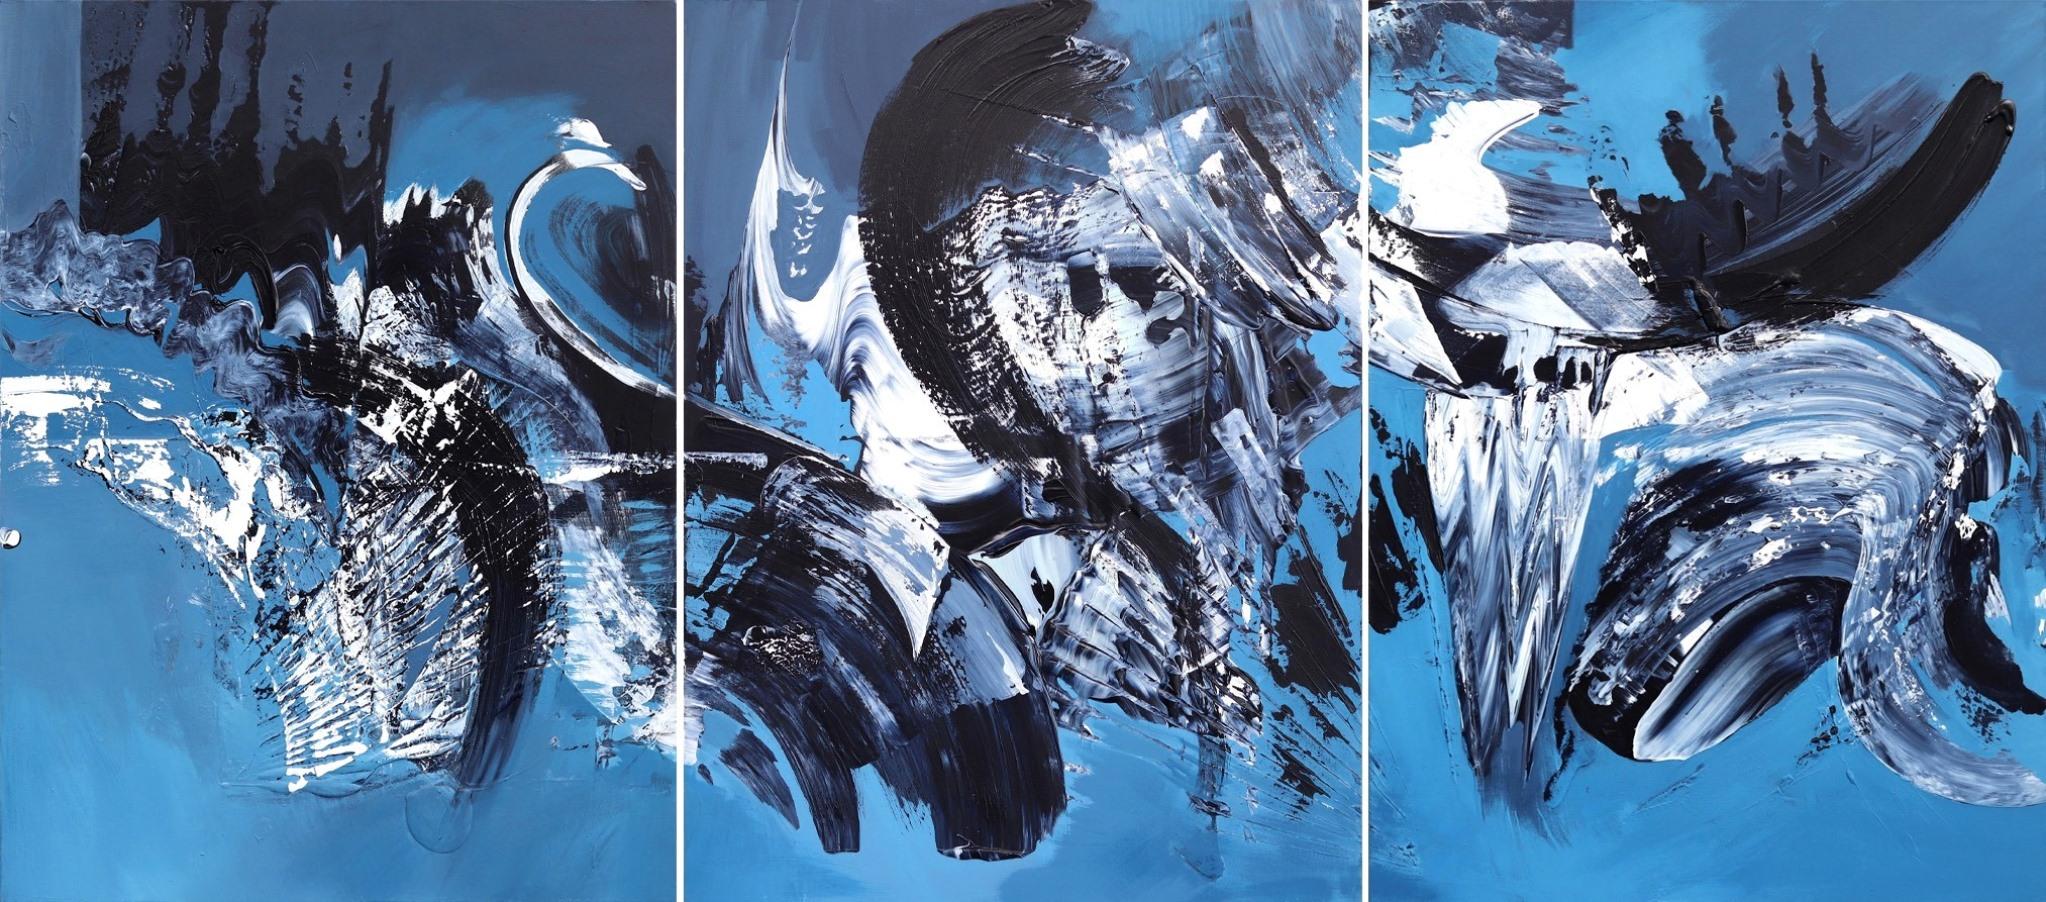 Joy In Motion (Triptych) - Large Scale Abstract Artwork